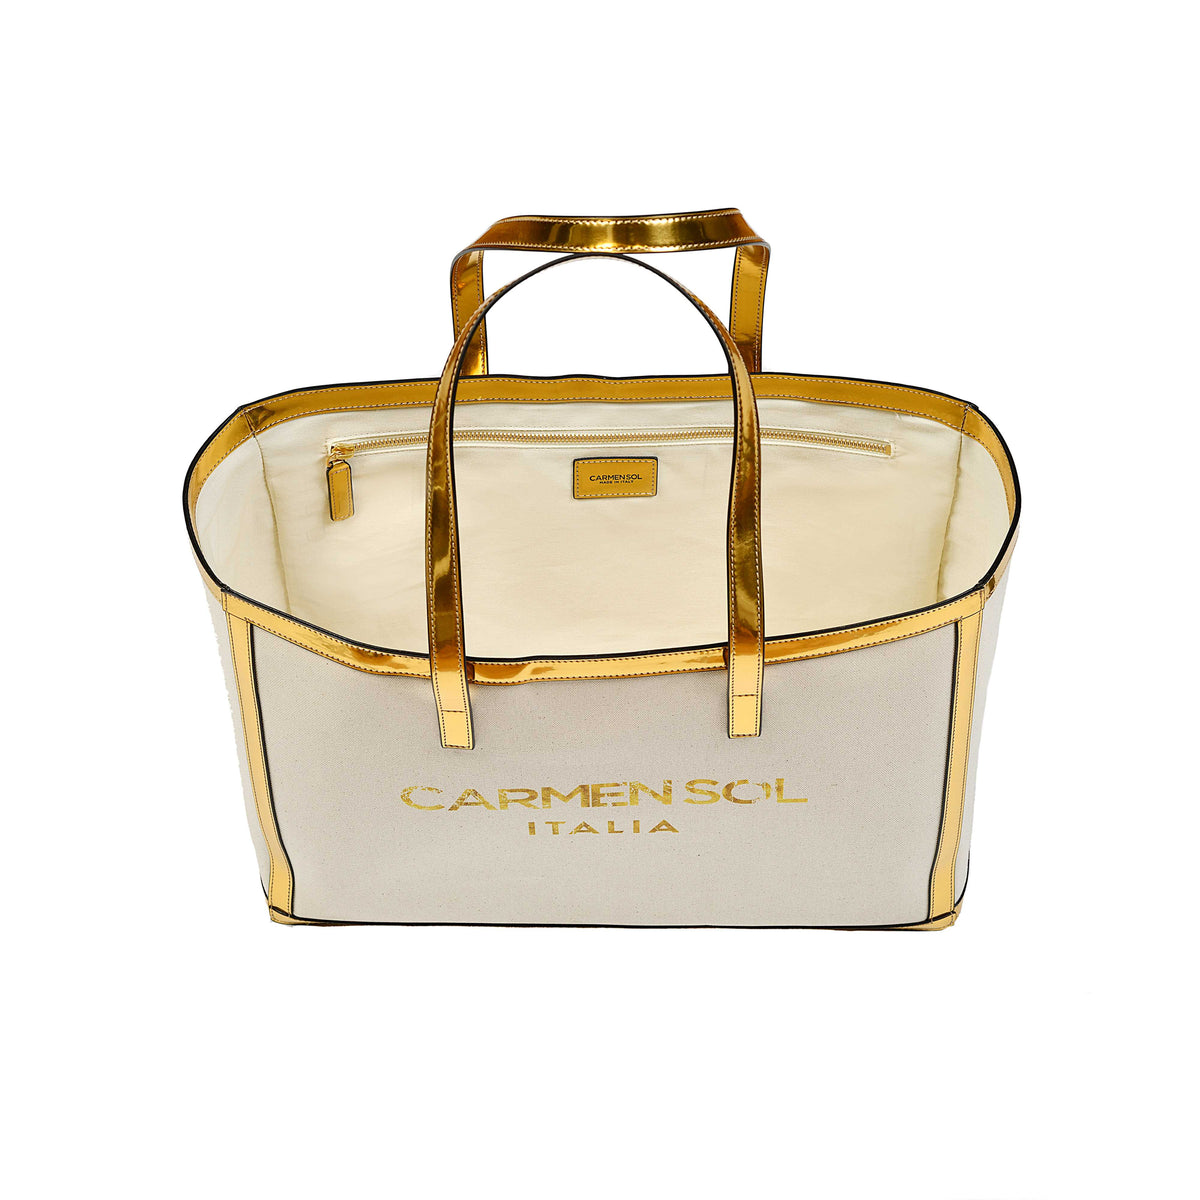 Inner view of gold large tote bags for women